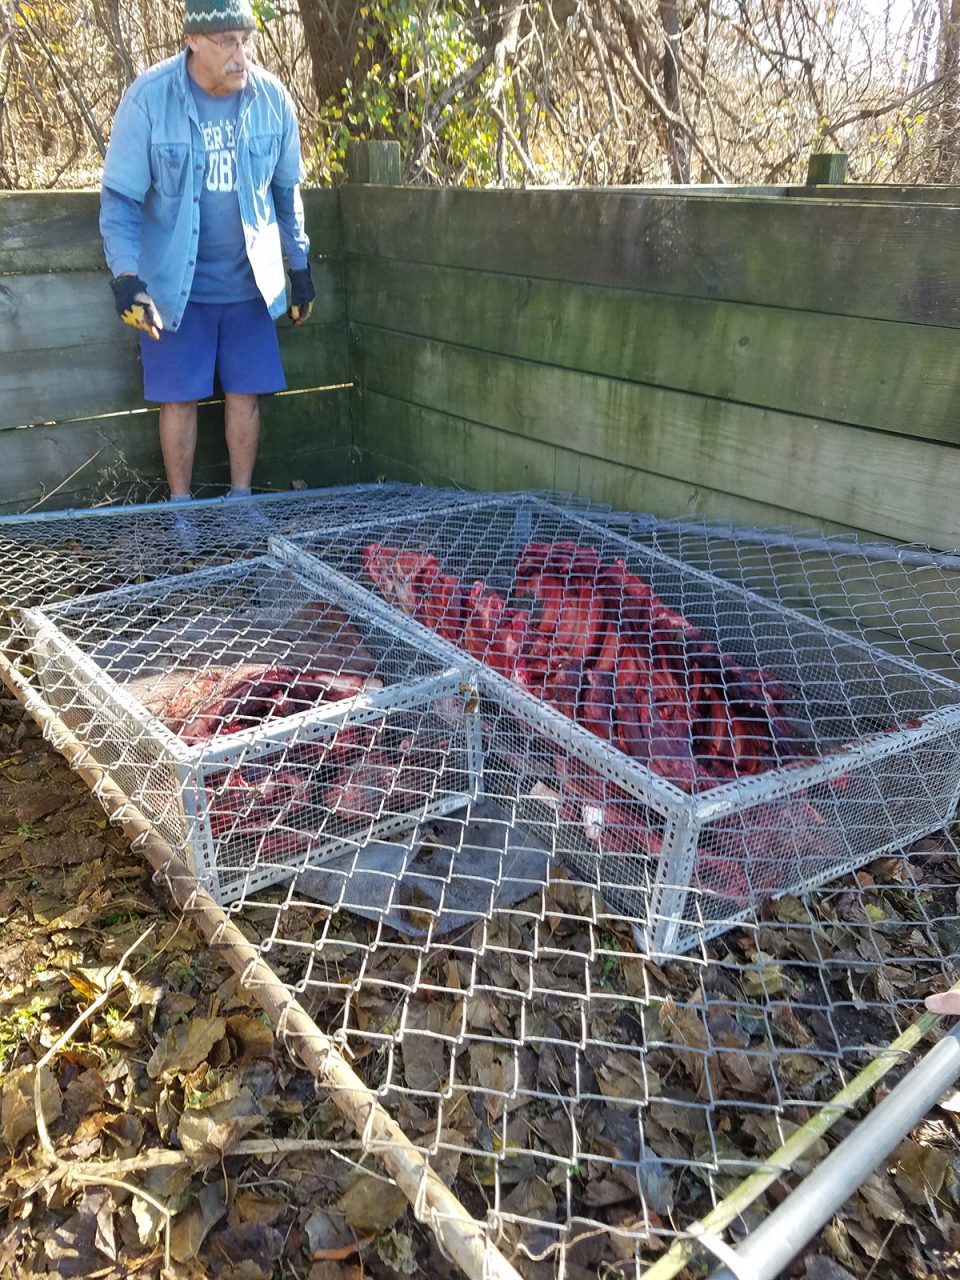 Keith Rittmaster shows the manatee decomposition cages. Contributed photo by Jonathan Pishney